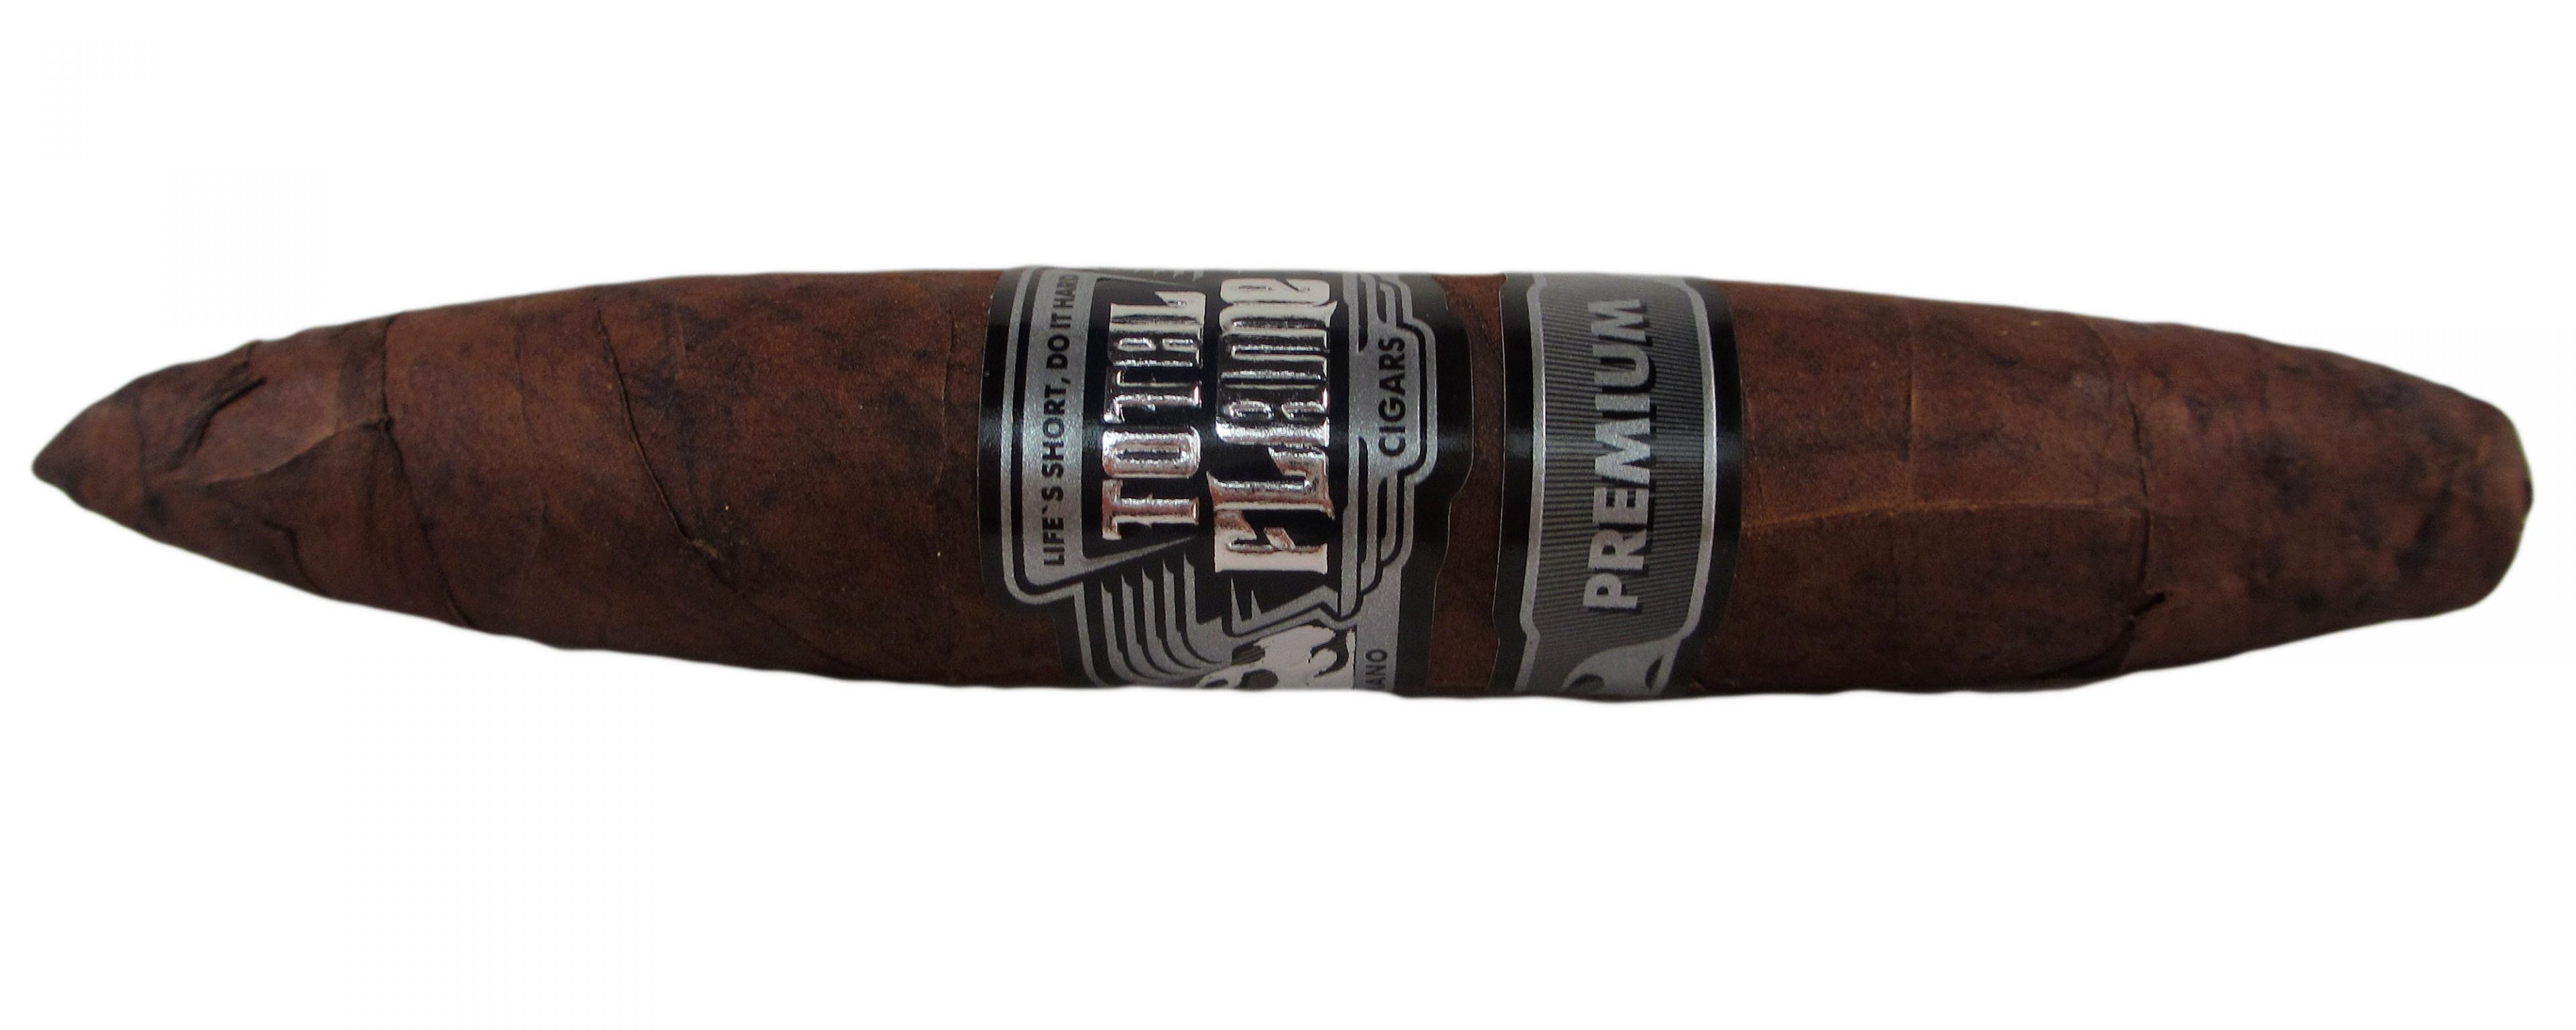 Blind Cigar Review: Total Flame | Premium Perfecto (Prerelease)